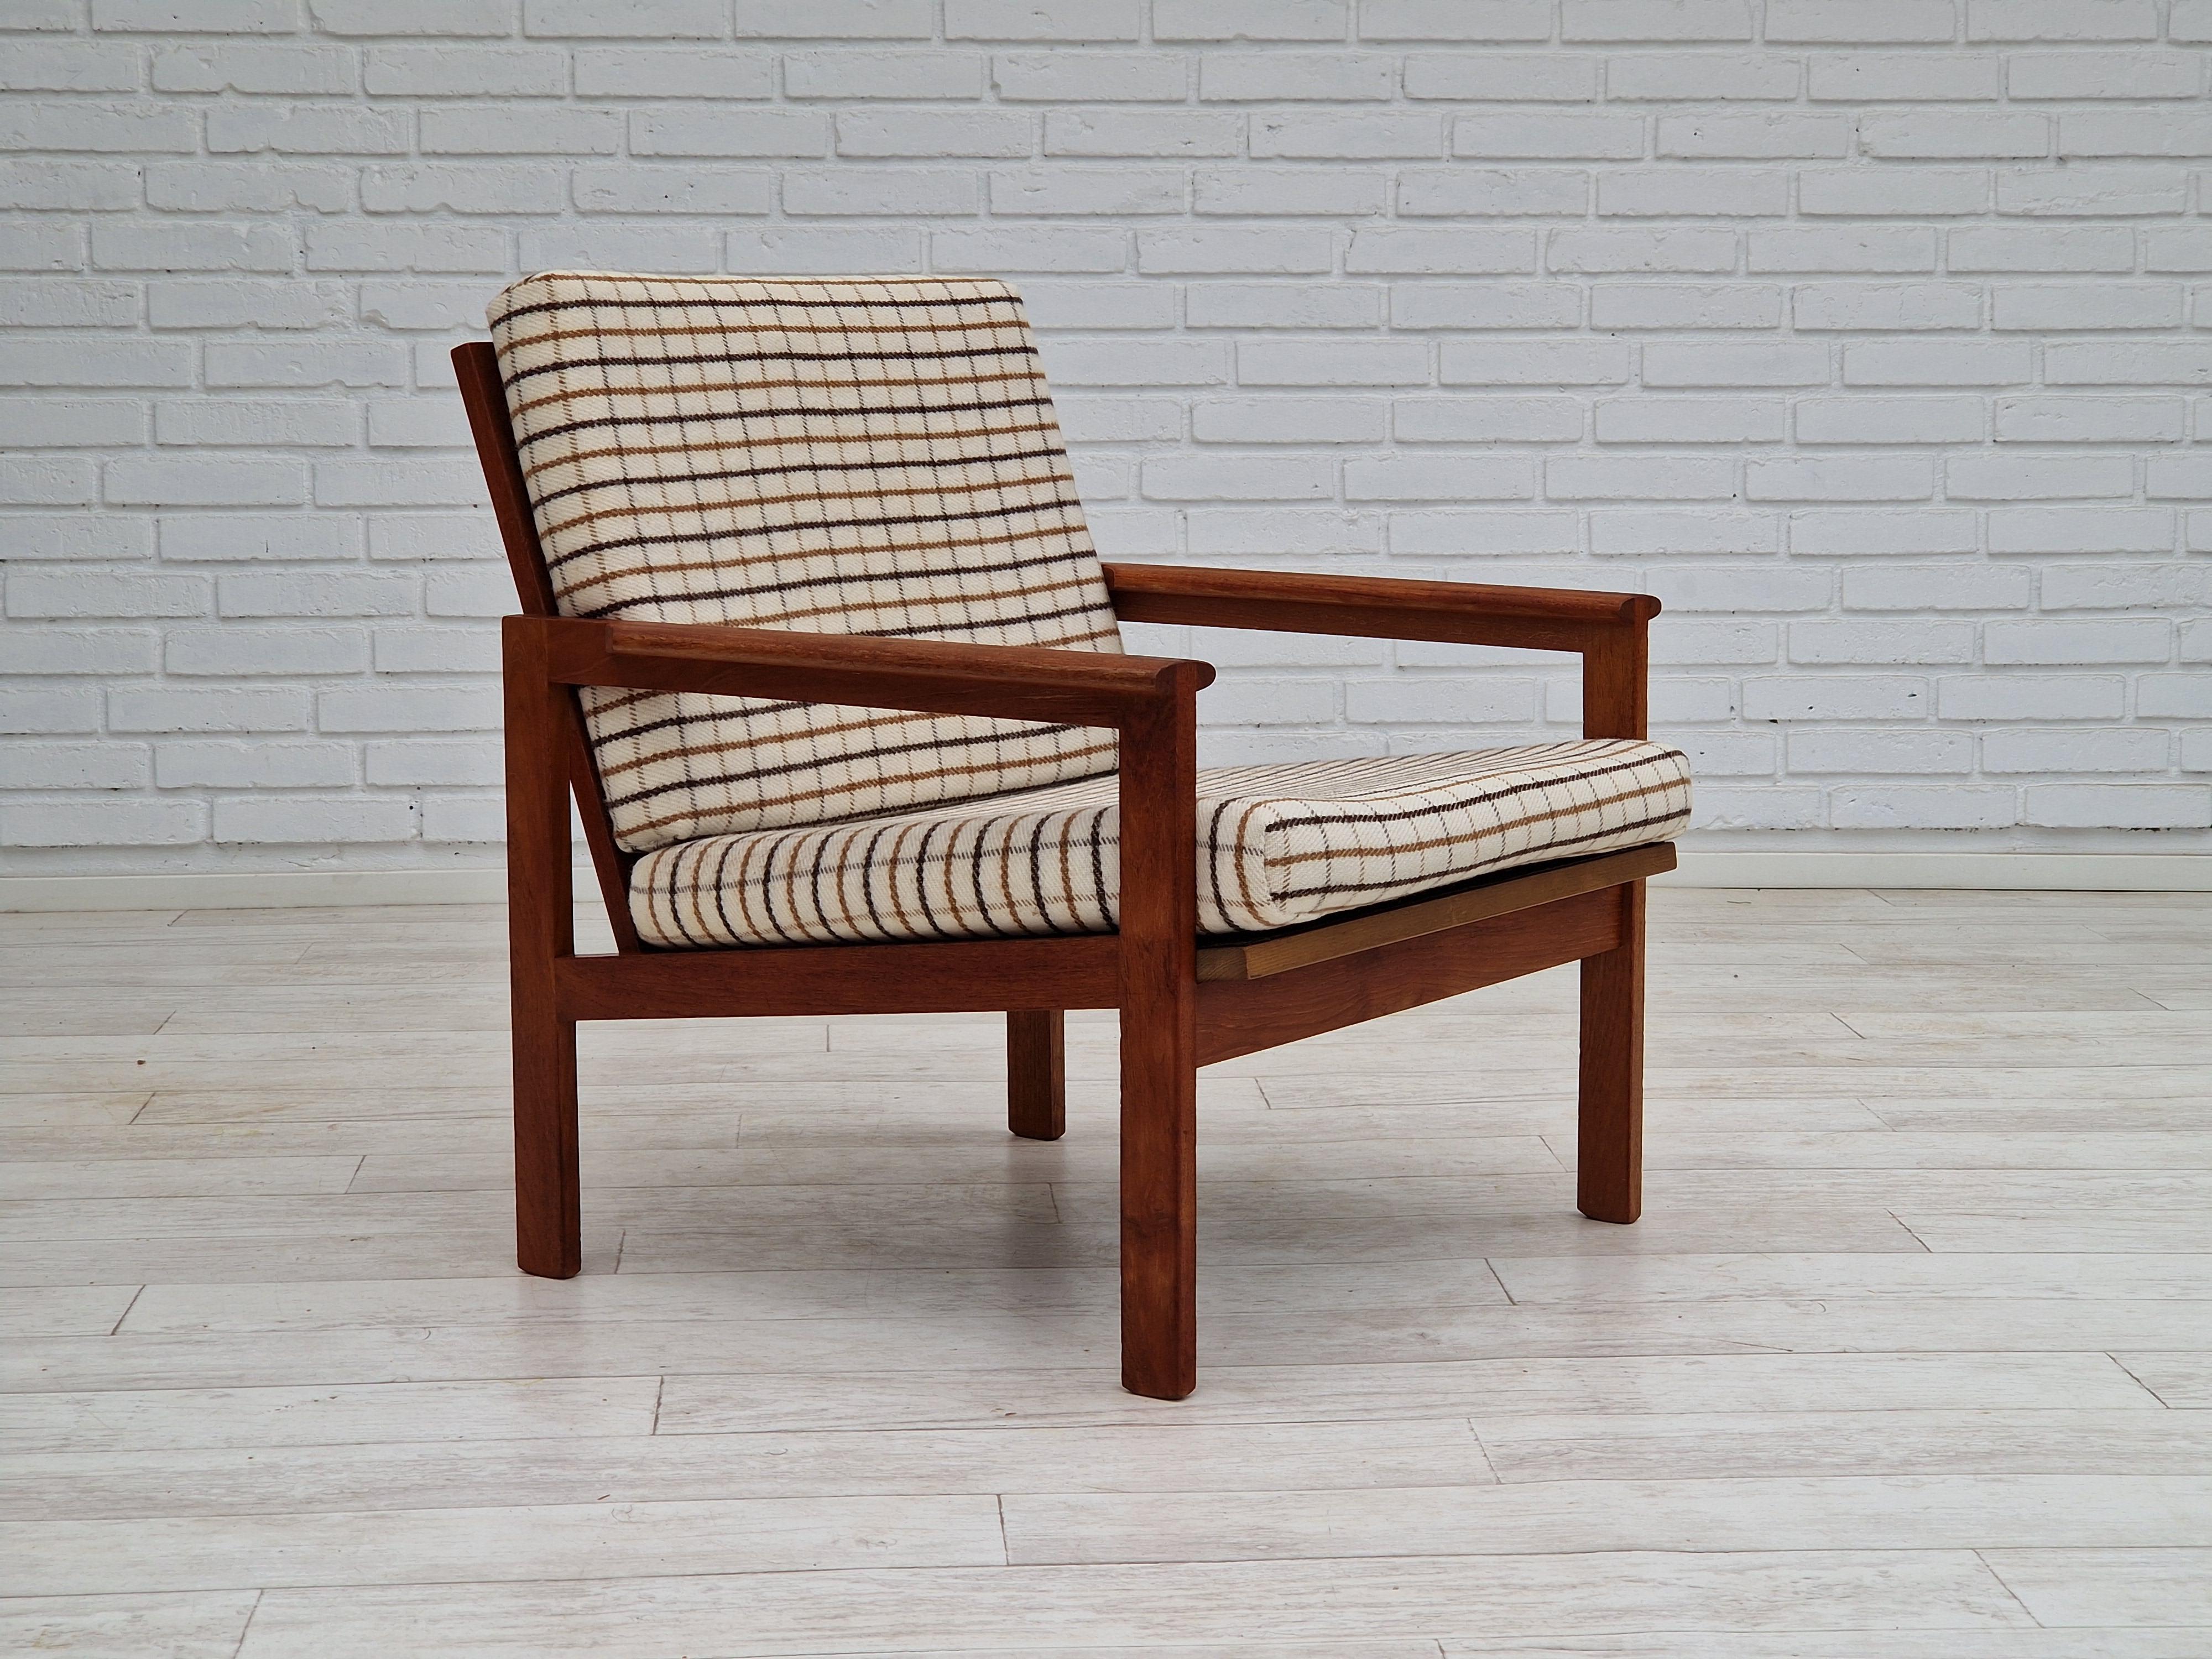 1970s, Danish design by Illum Wikkelsø, model Capella for Eliersen Møbler. Teak wood. Very good condition: no smells and no stains. New reupholstered in a few years ago.